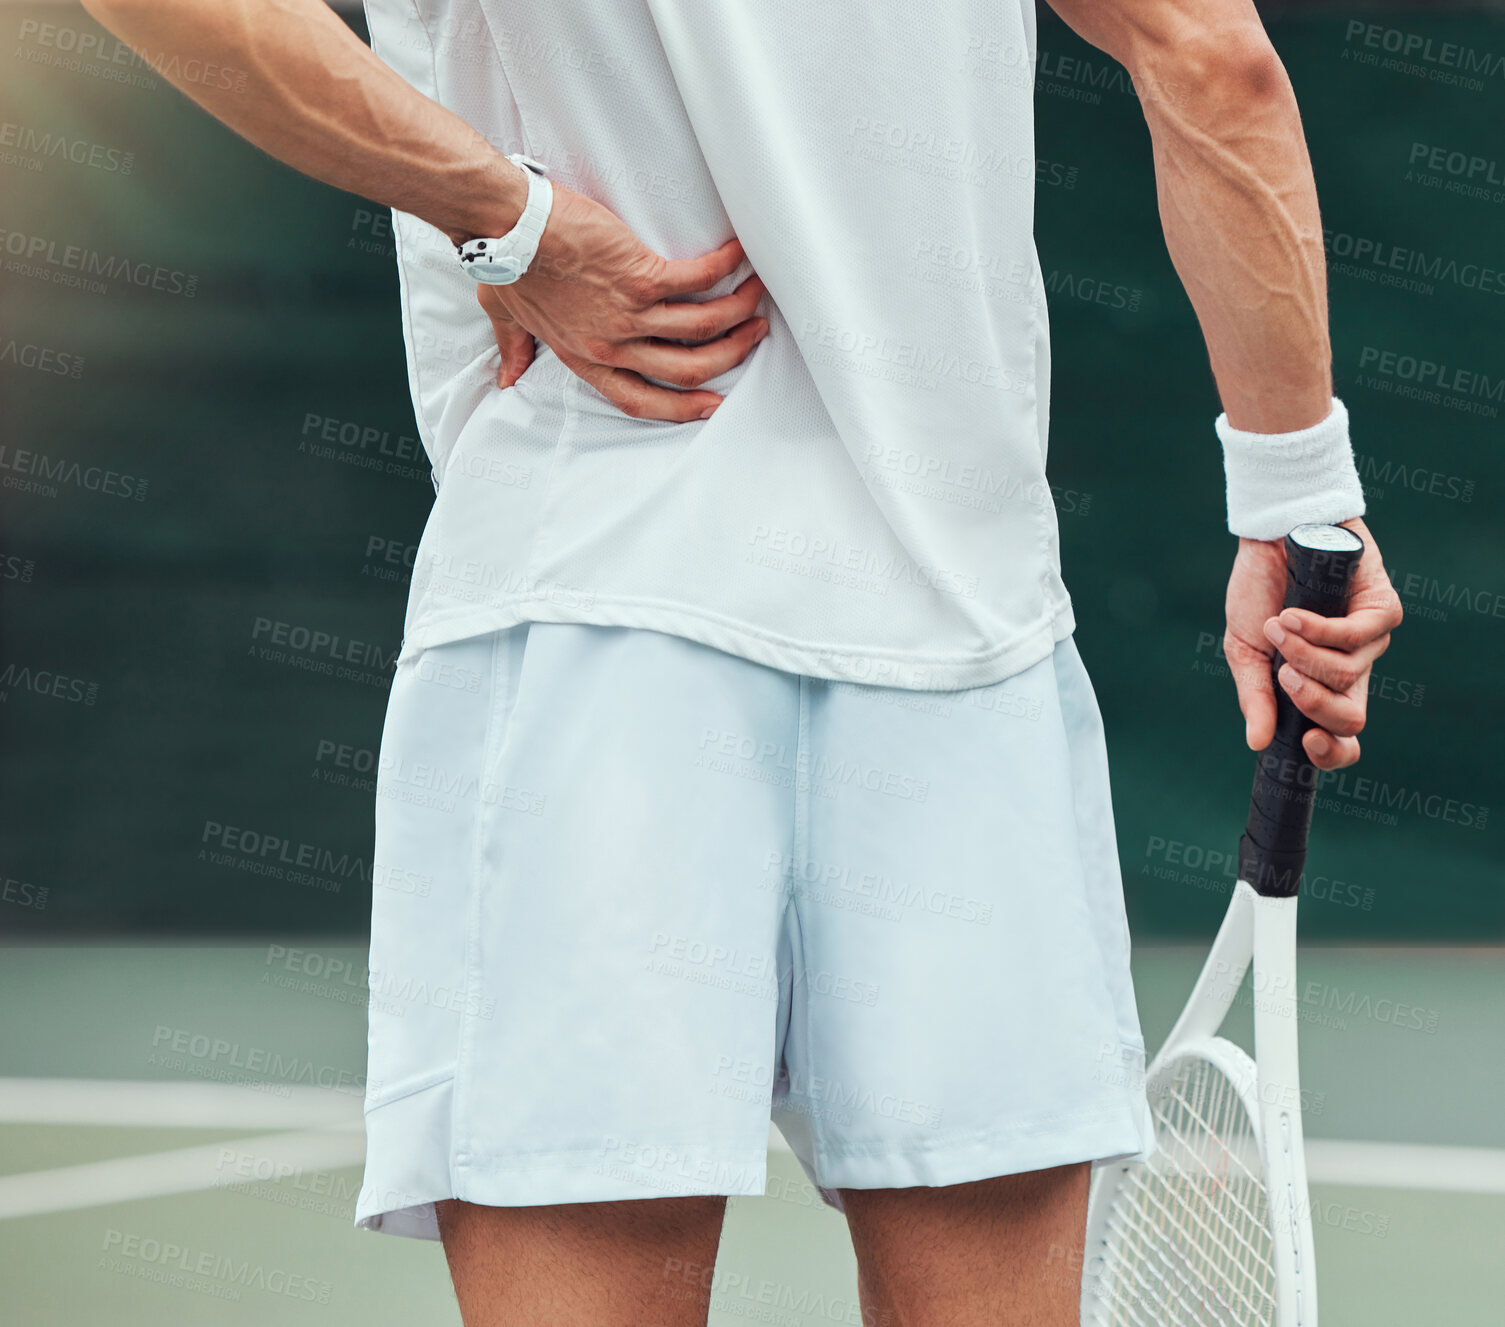 Buy stock photo Rearview unknown mixed race tennis player suffering from backache in court game. Hispanic fit athlete in pain while holding and rubbing back injury in match. Sporty man standing alone in sports club